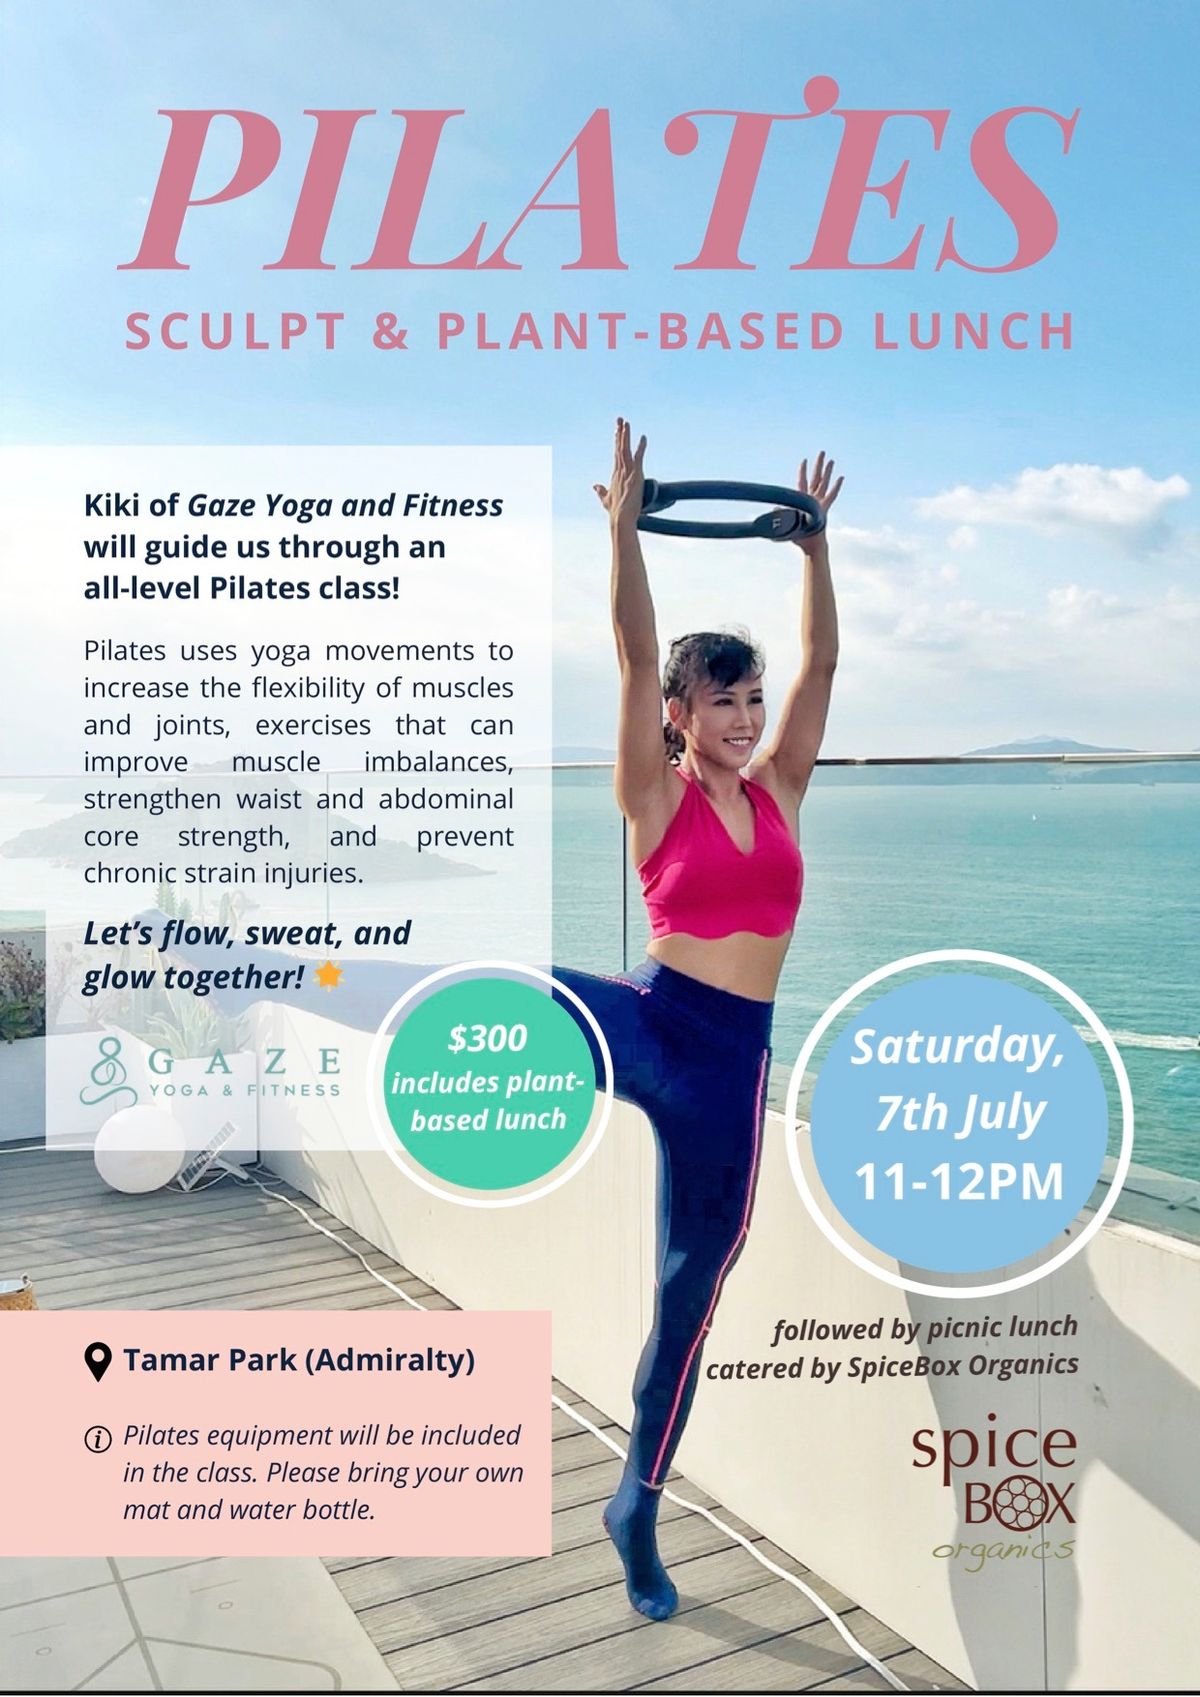 Pilates Sculpt & Plant Based Lunch with Kiki @ Tamar Park, Admiralty